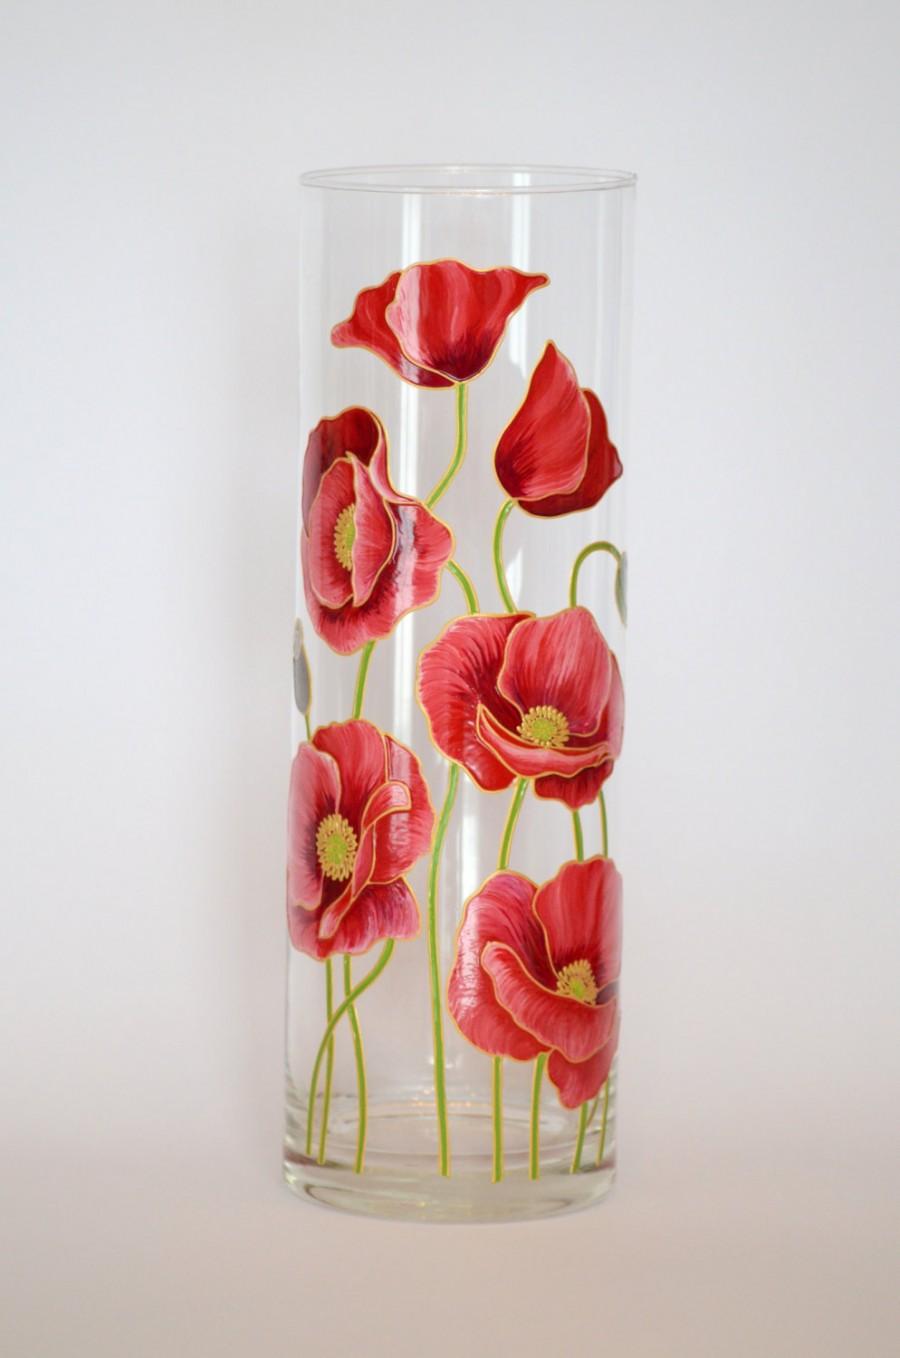 Wedding Gift For Friends Hand Painted Vase Flower Home Decor